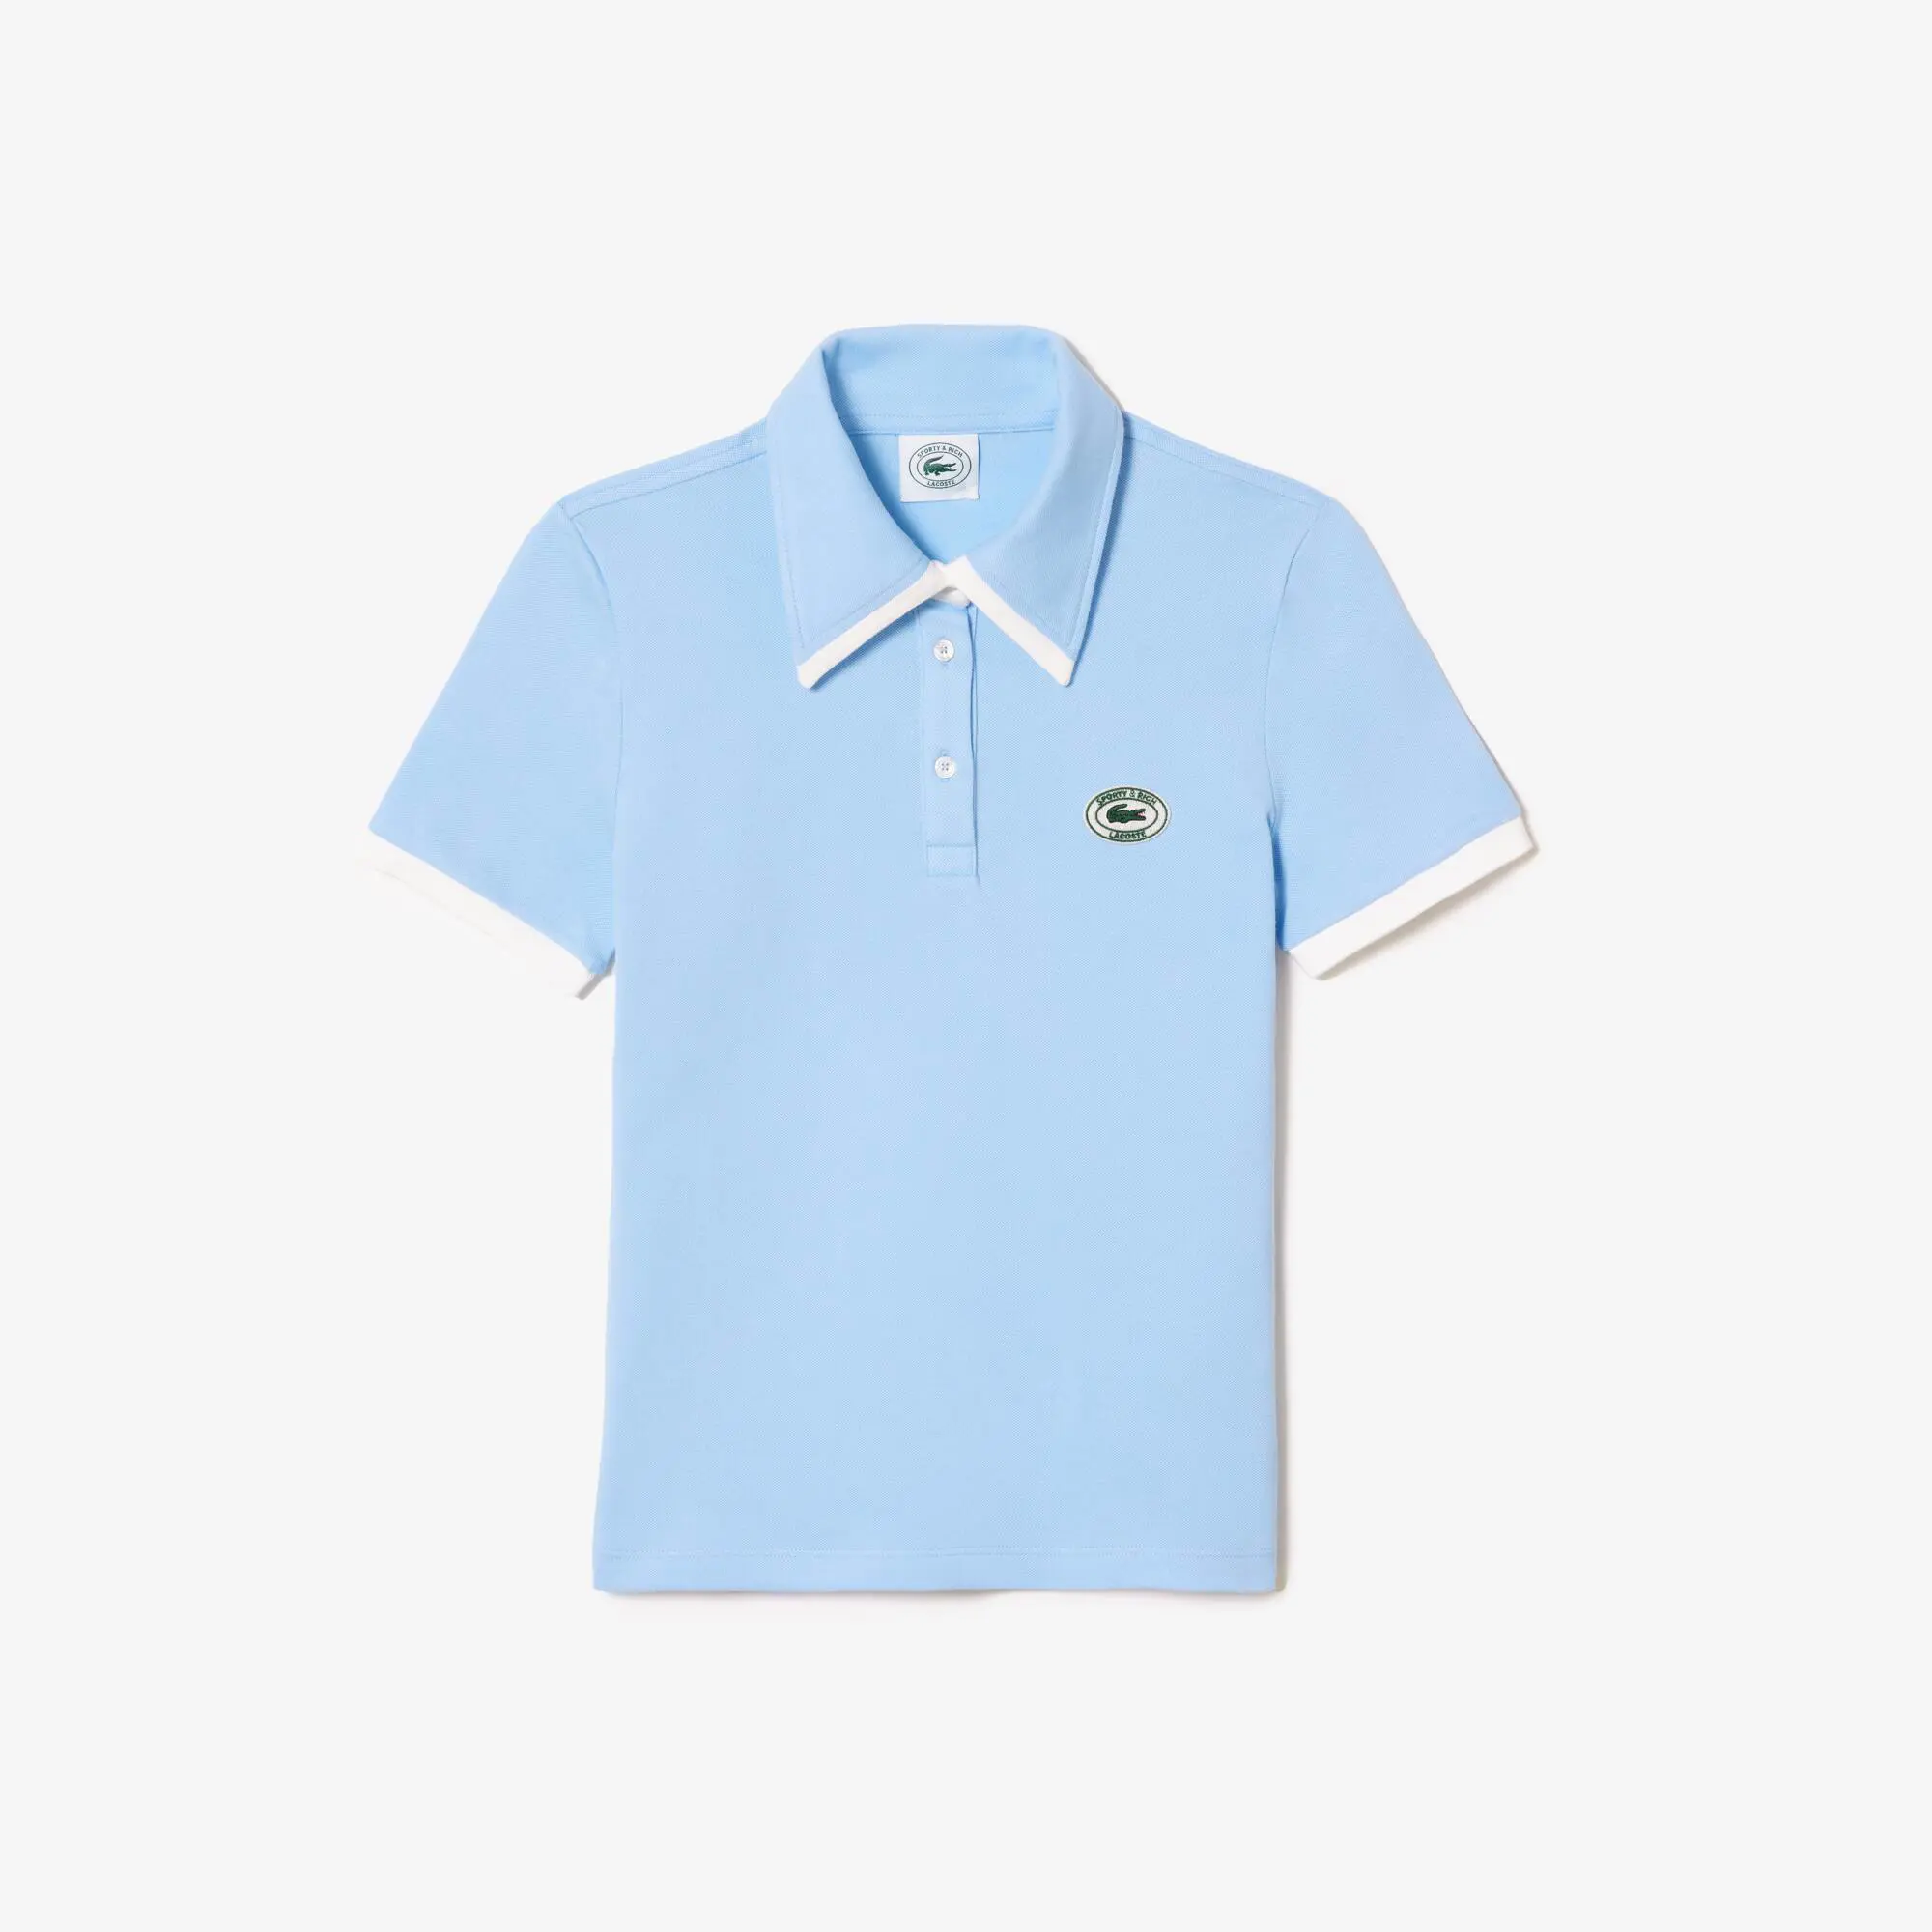 Lacoste x Sporty & Rich Contrast Collar Polo Shirt. 2